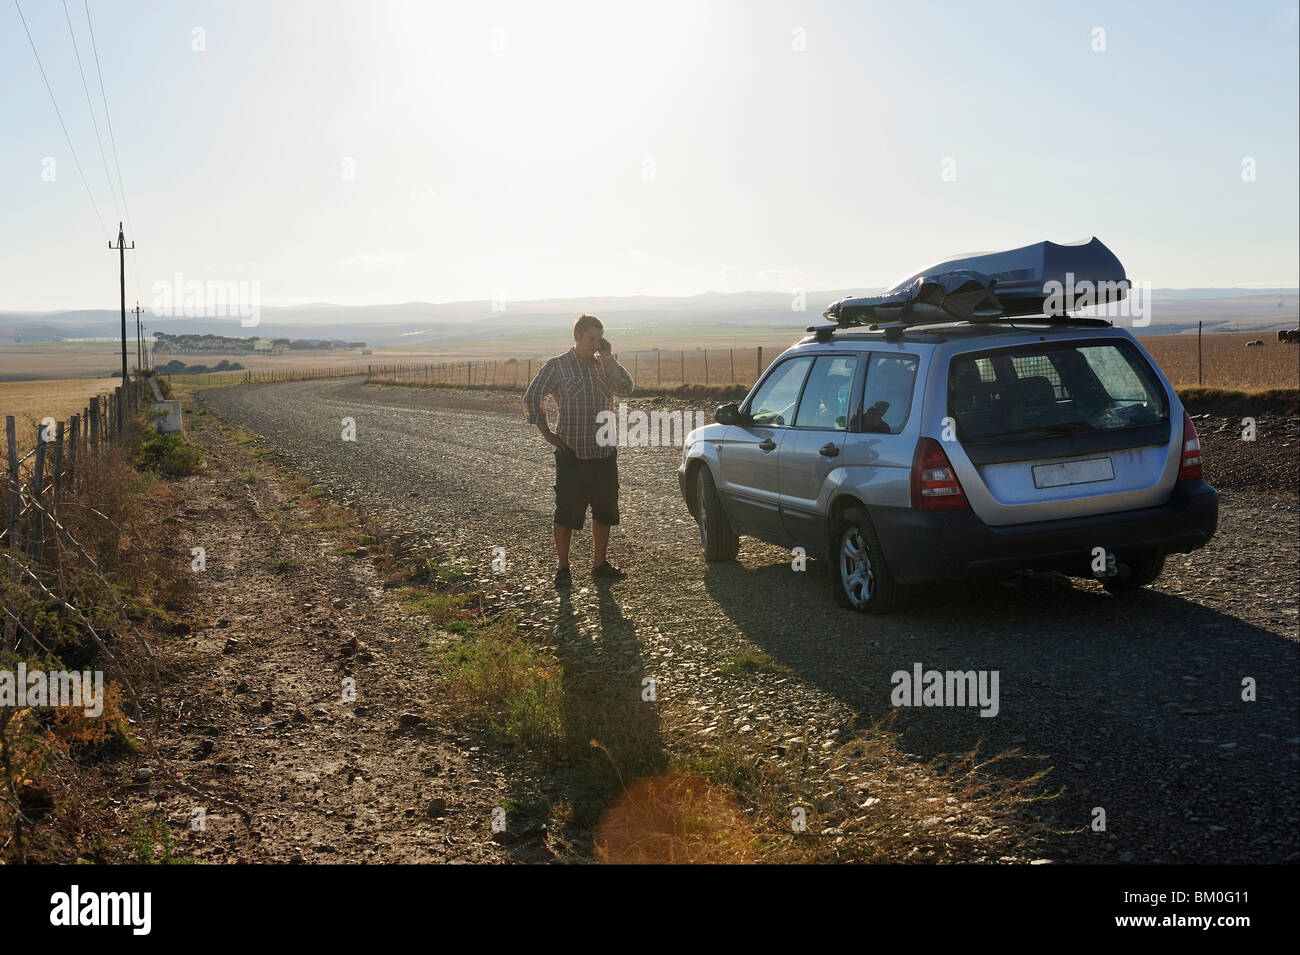 Man with flat tire on remote road, calling for help, near Malgas, Western Cape Province, South Africa Stock Photo